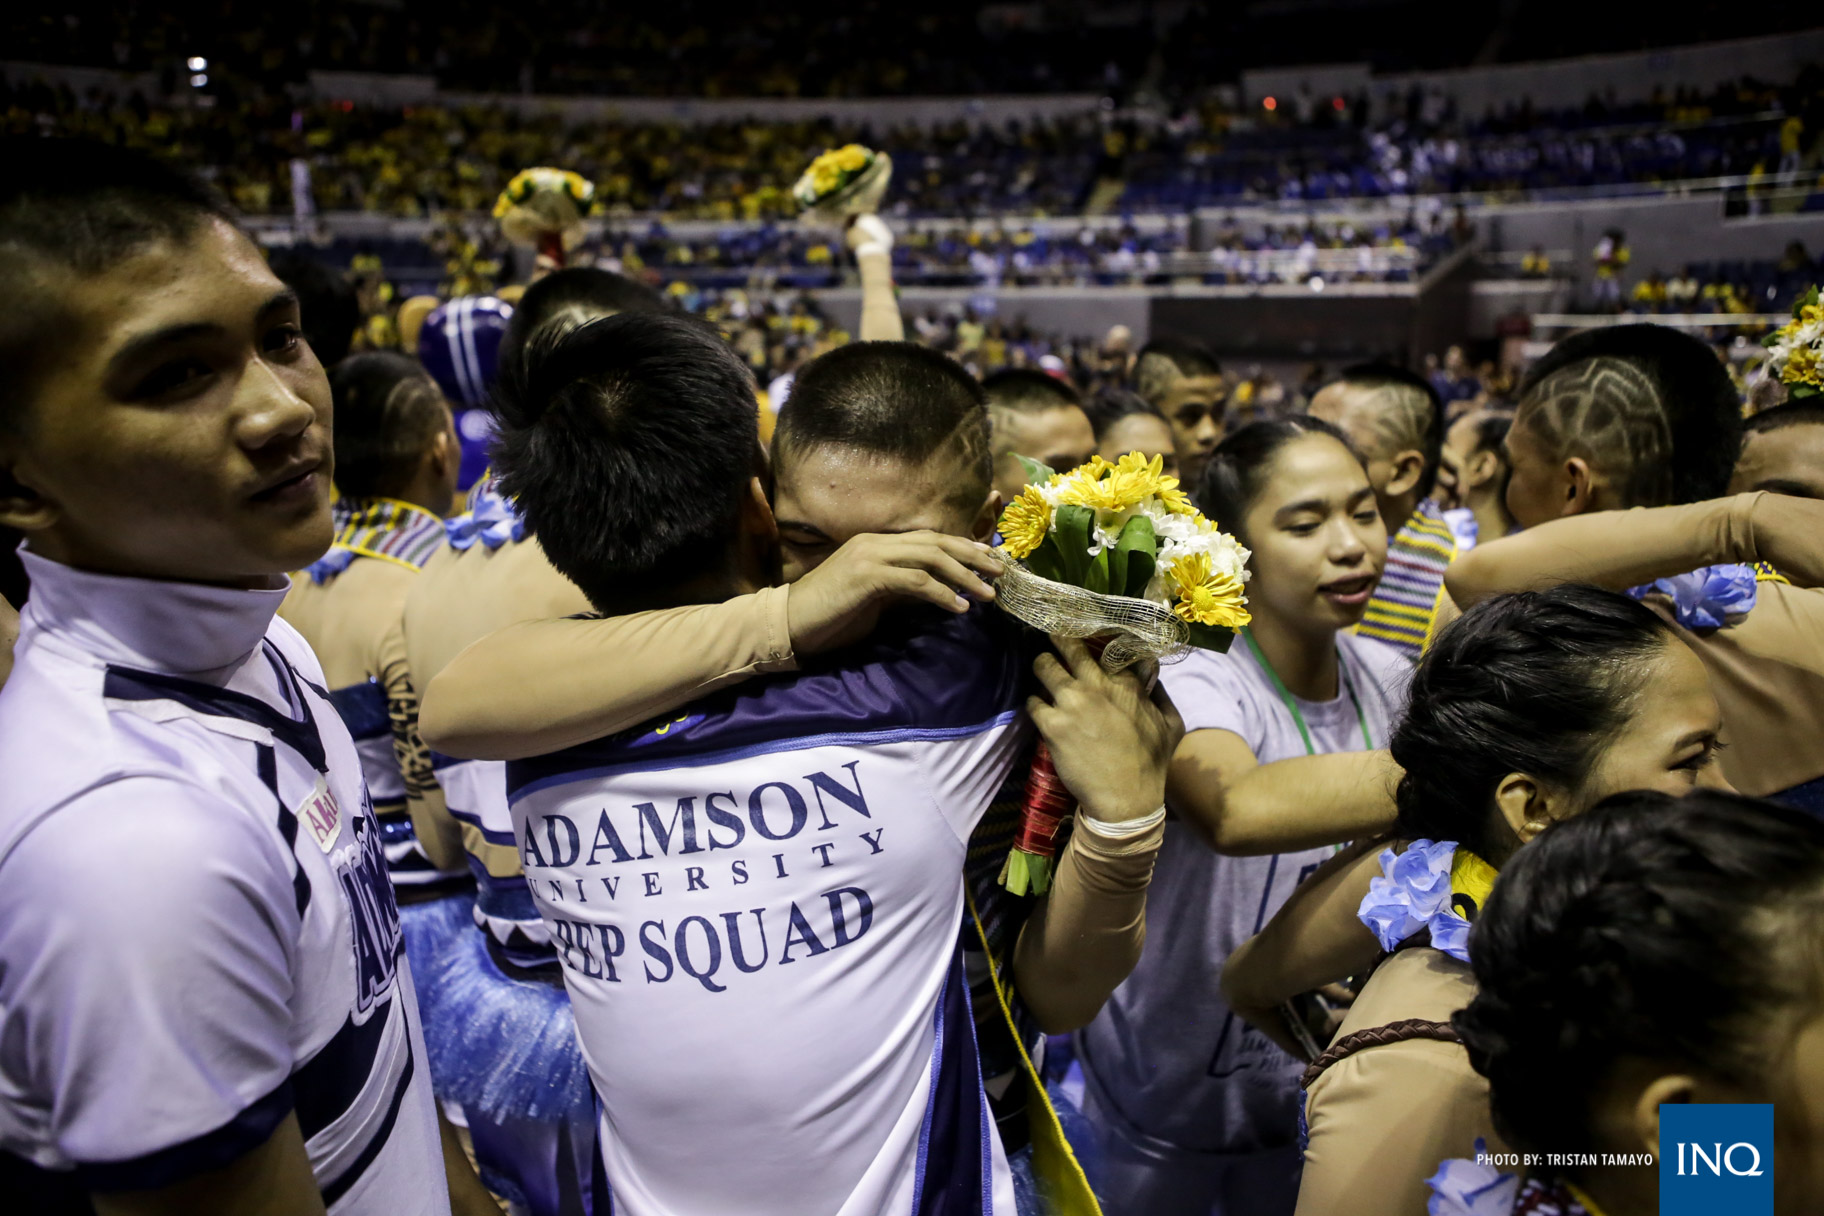 Adamson Pep squad celebrates its third place finish. Photo by Tristan Tamayo/INQUIRER.net